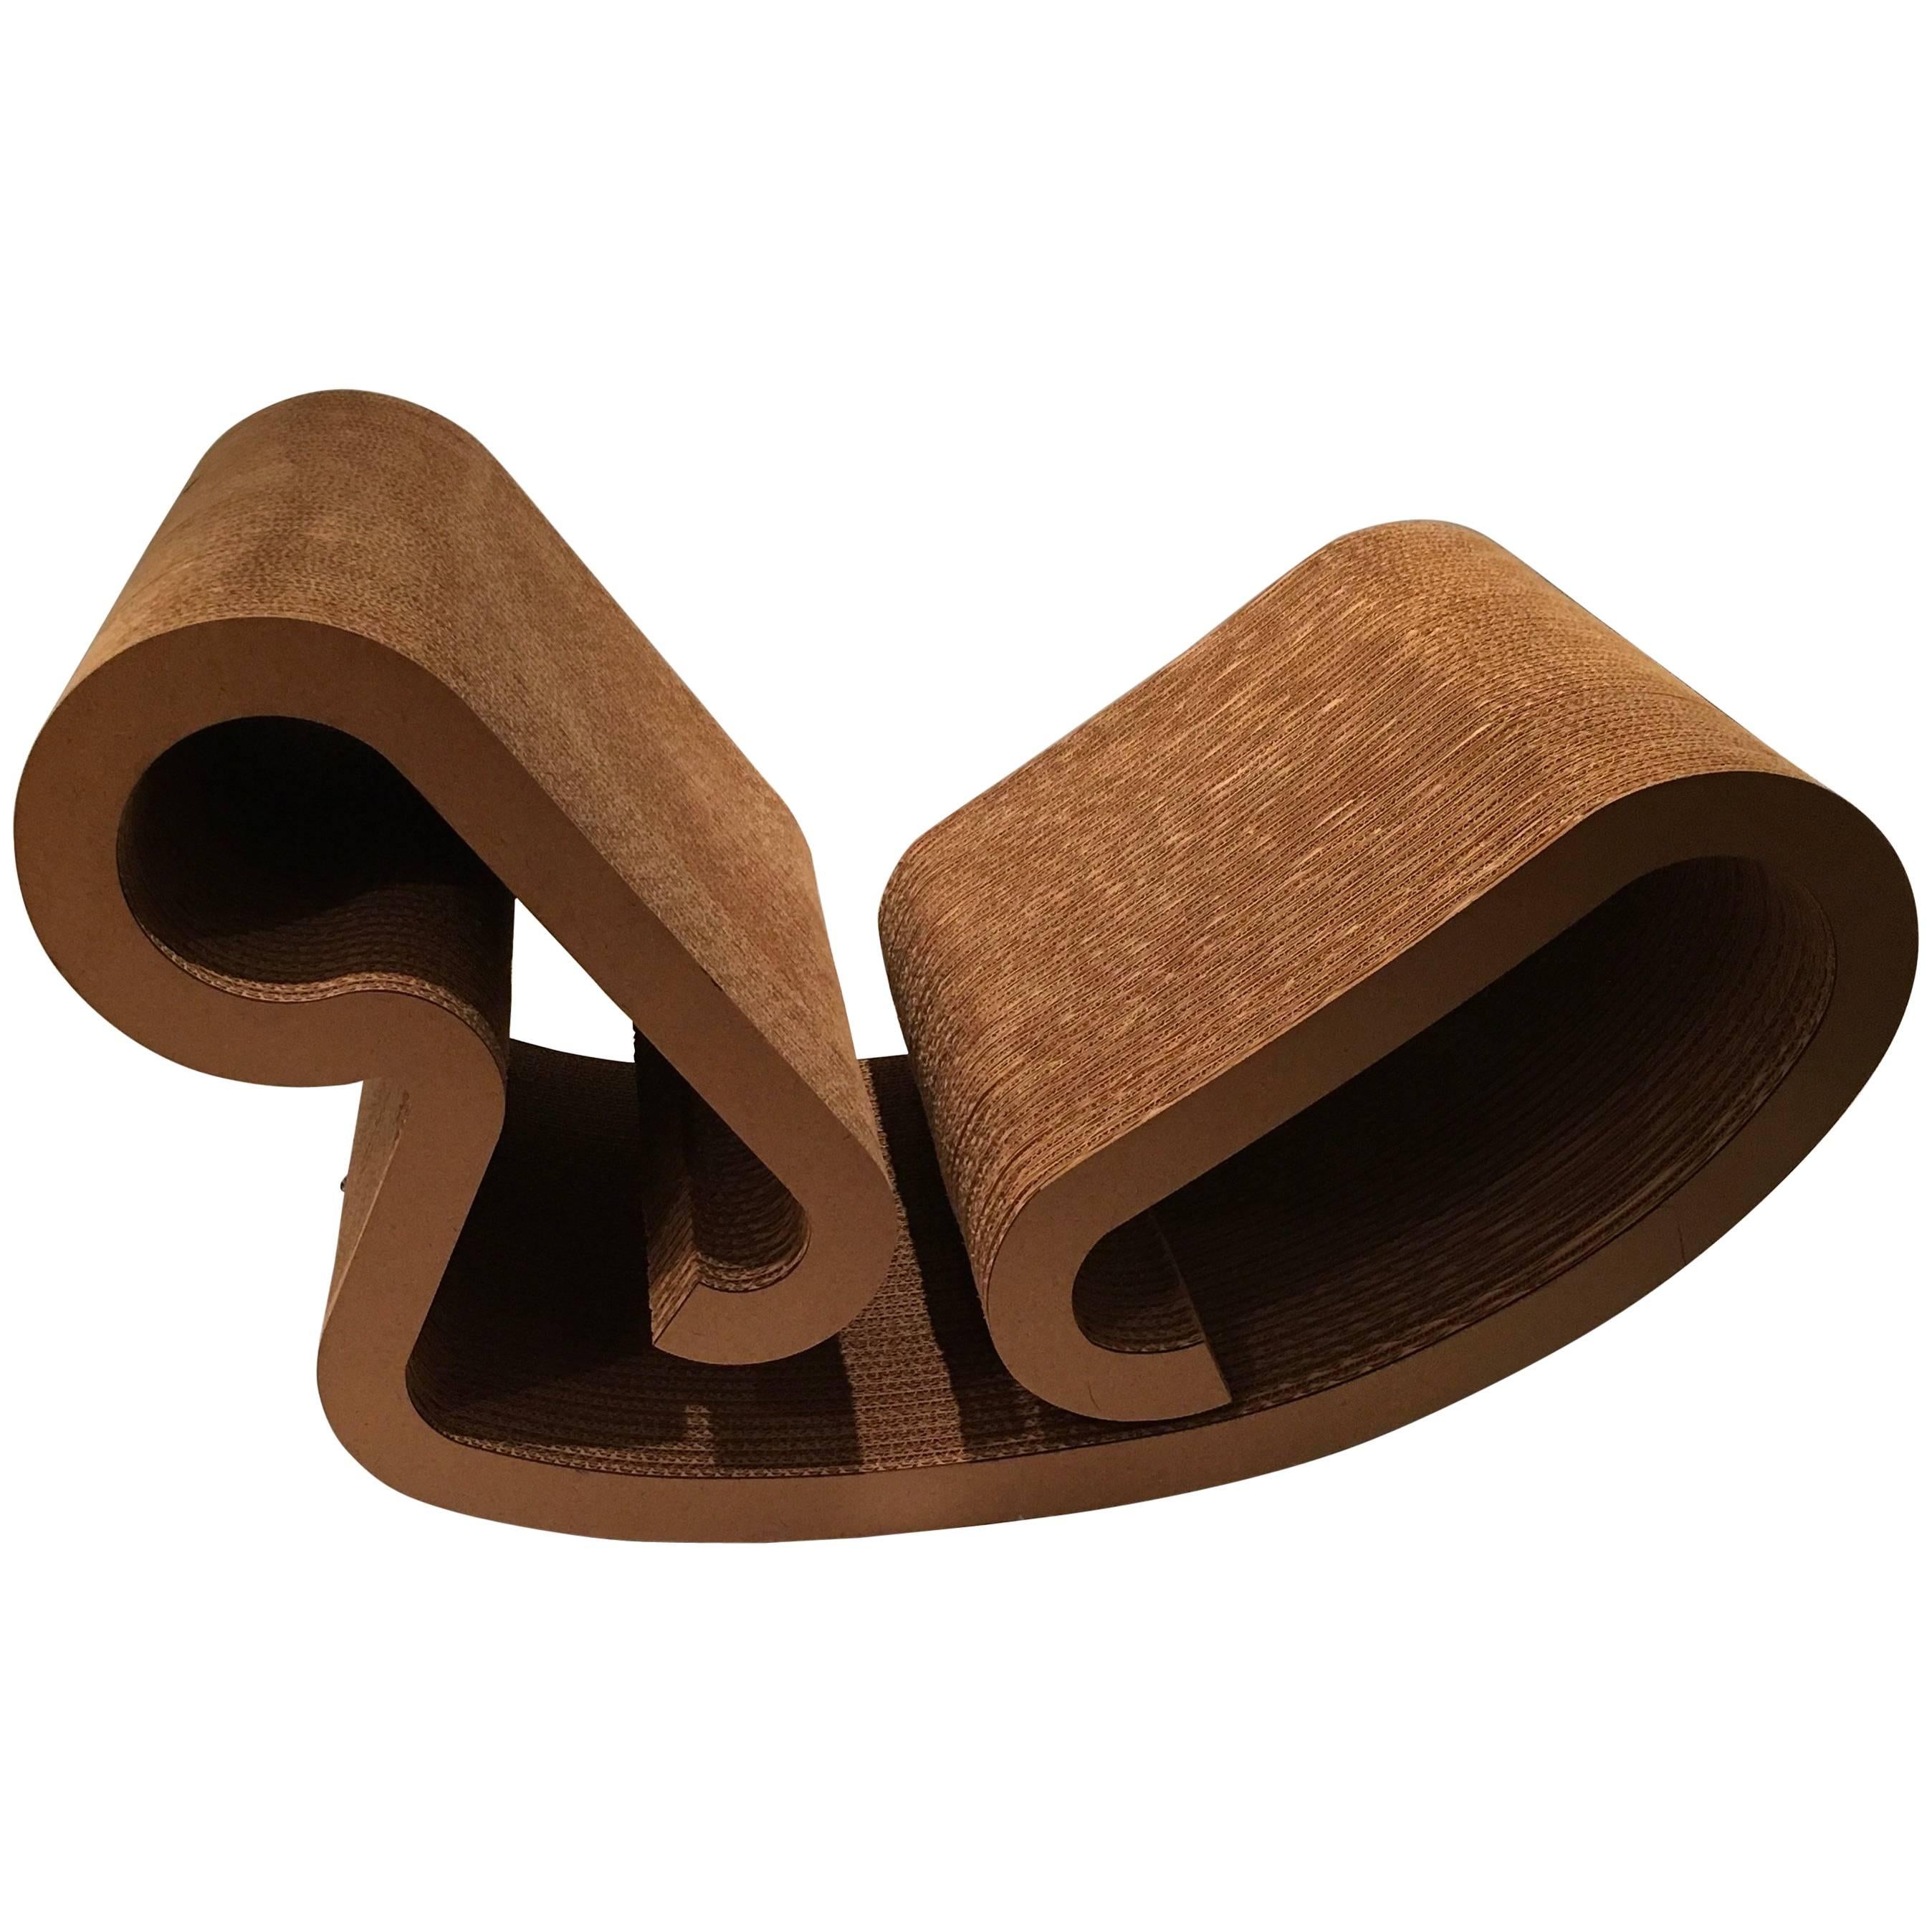 Frank Gehry "Easy Edges" Rocking Chair